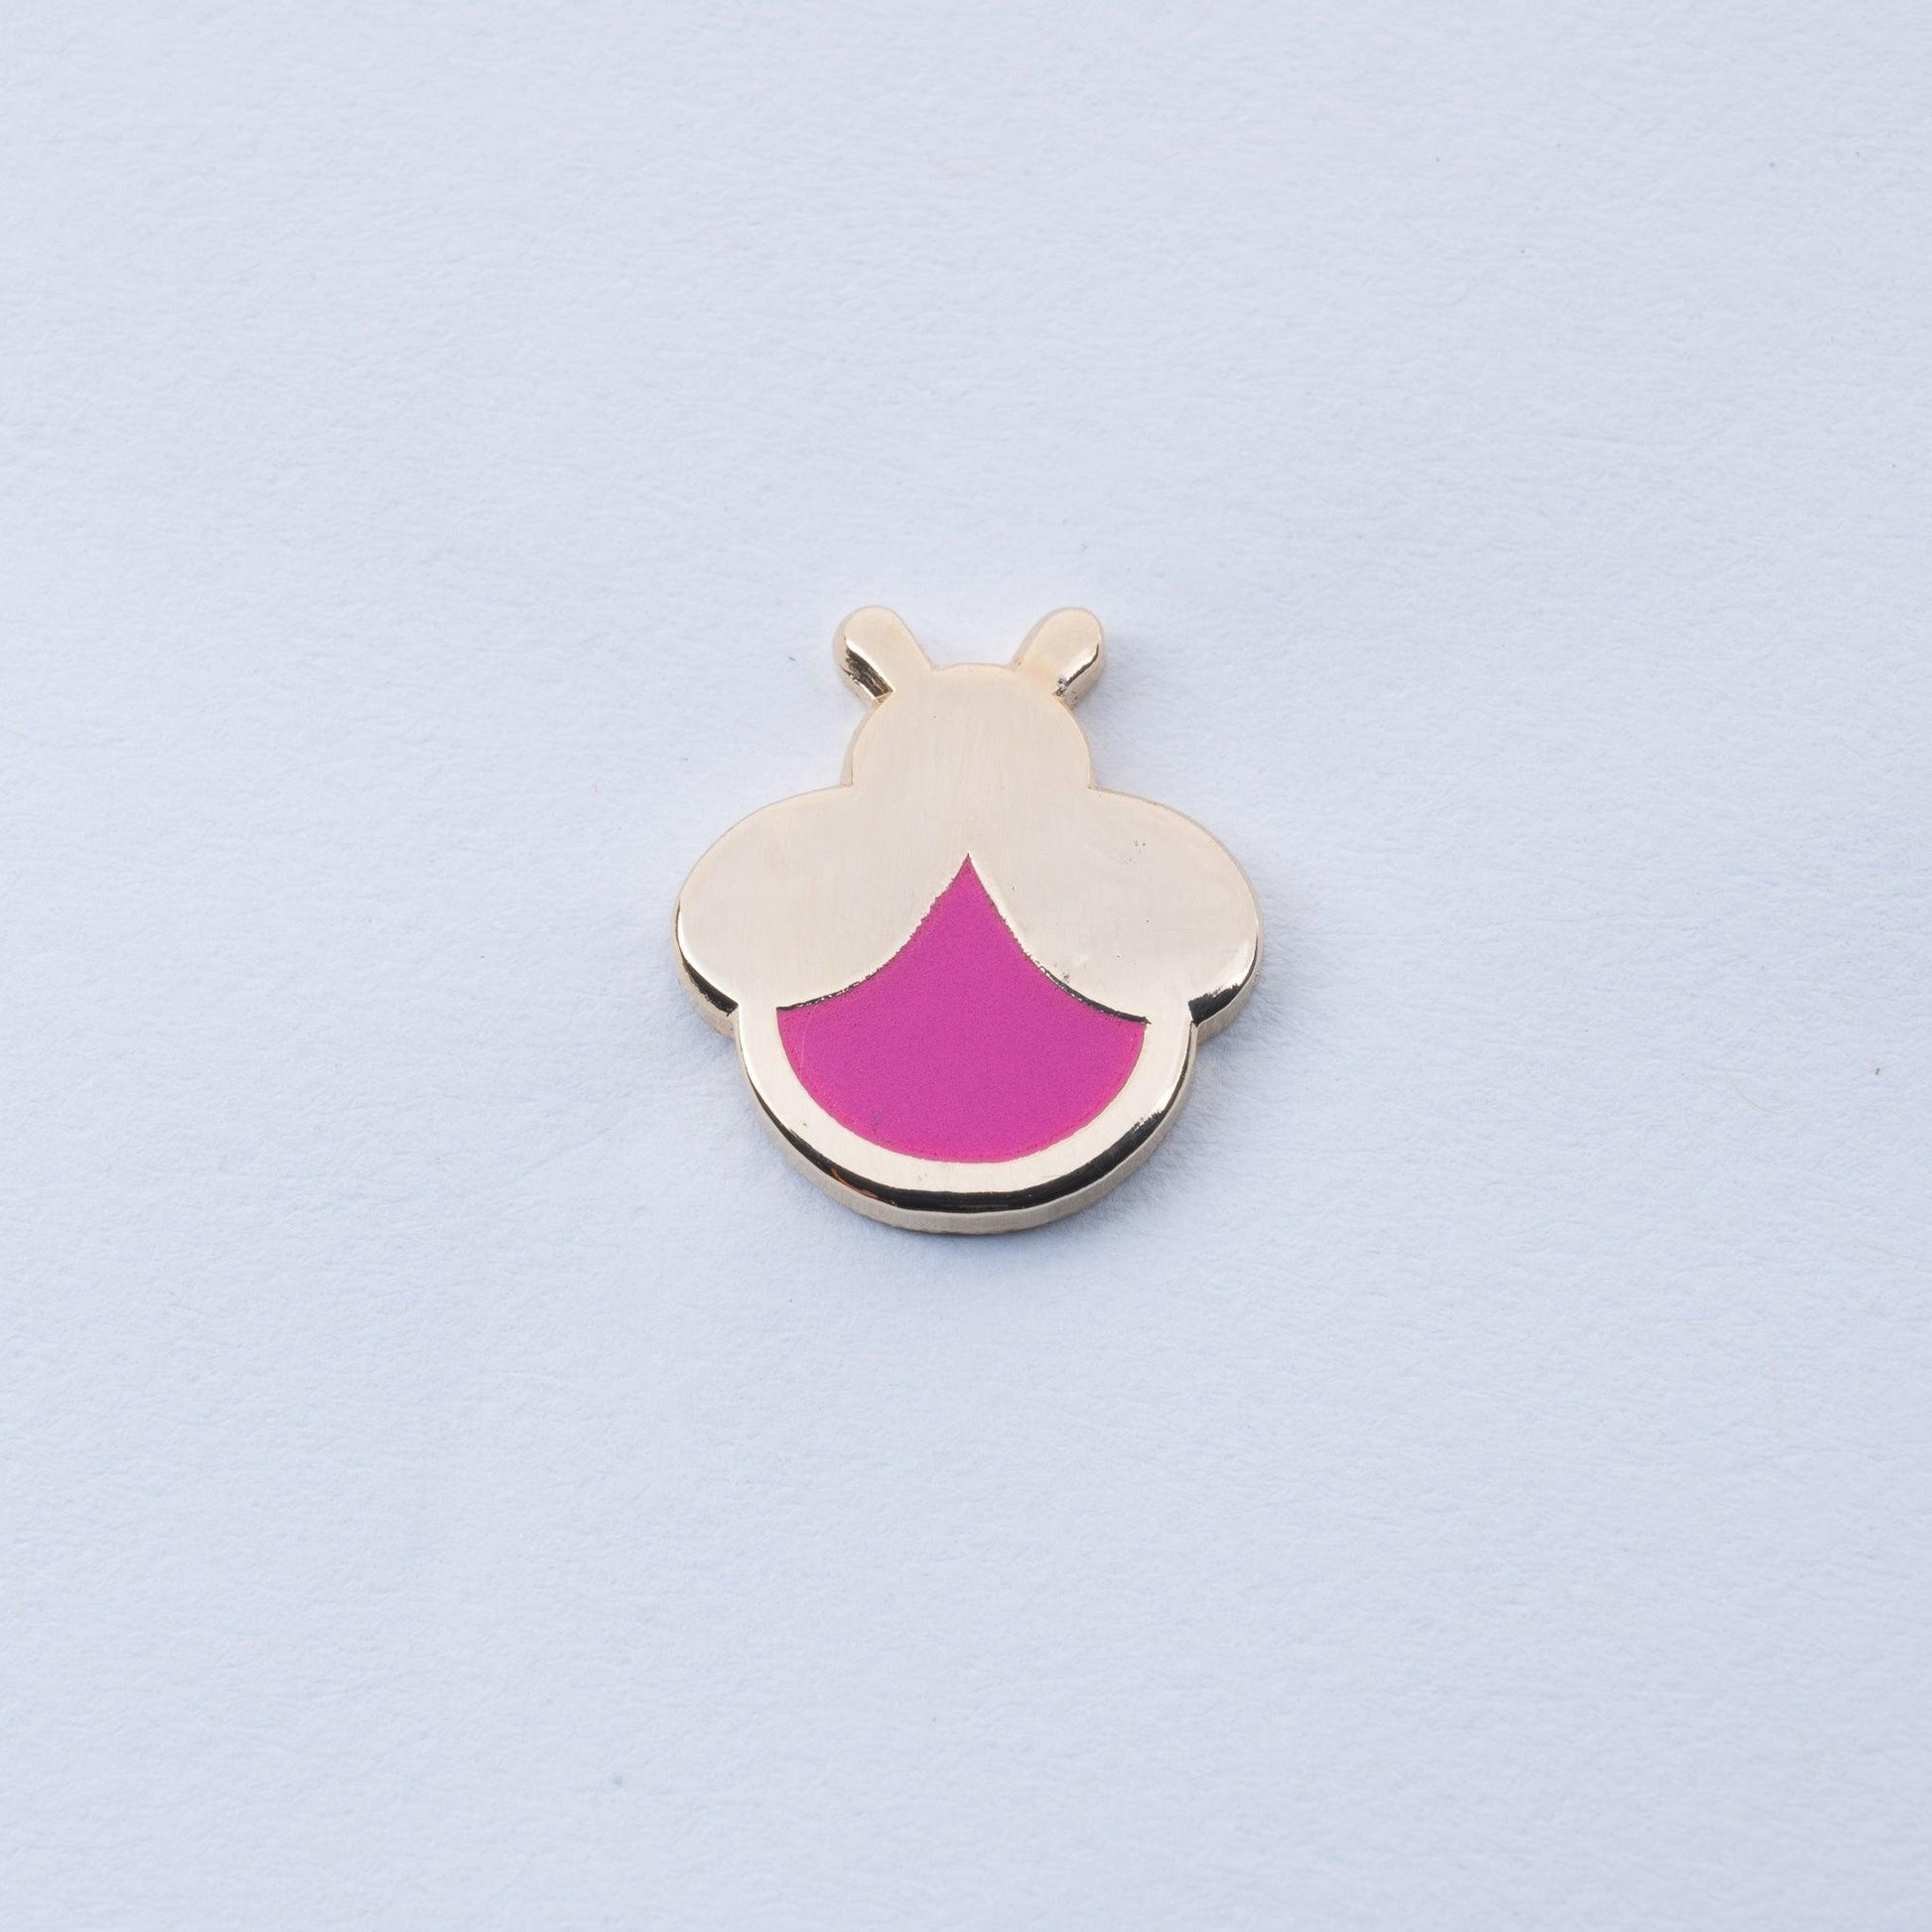 gold plated firefly enamel pin with magenta body that glows in the dark